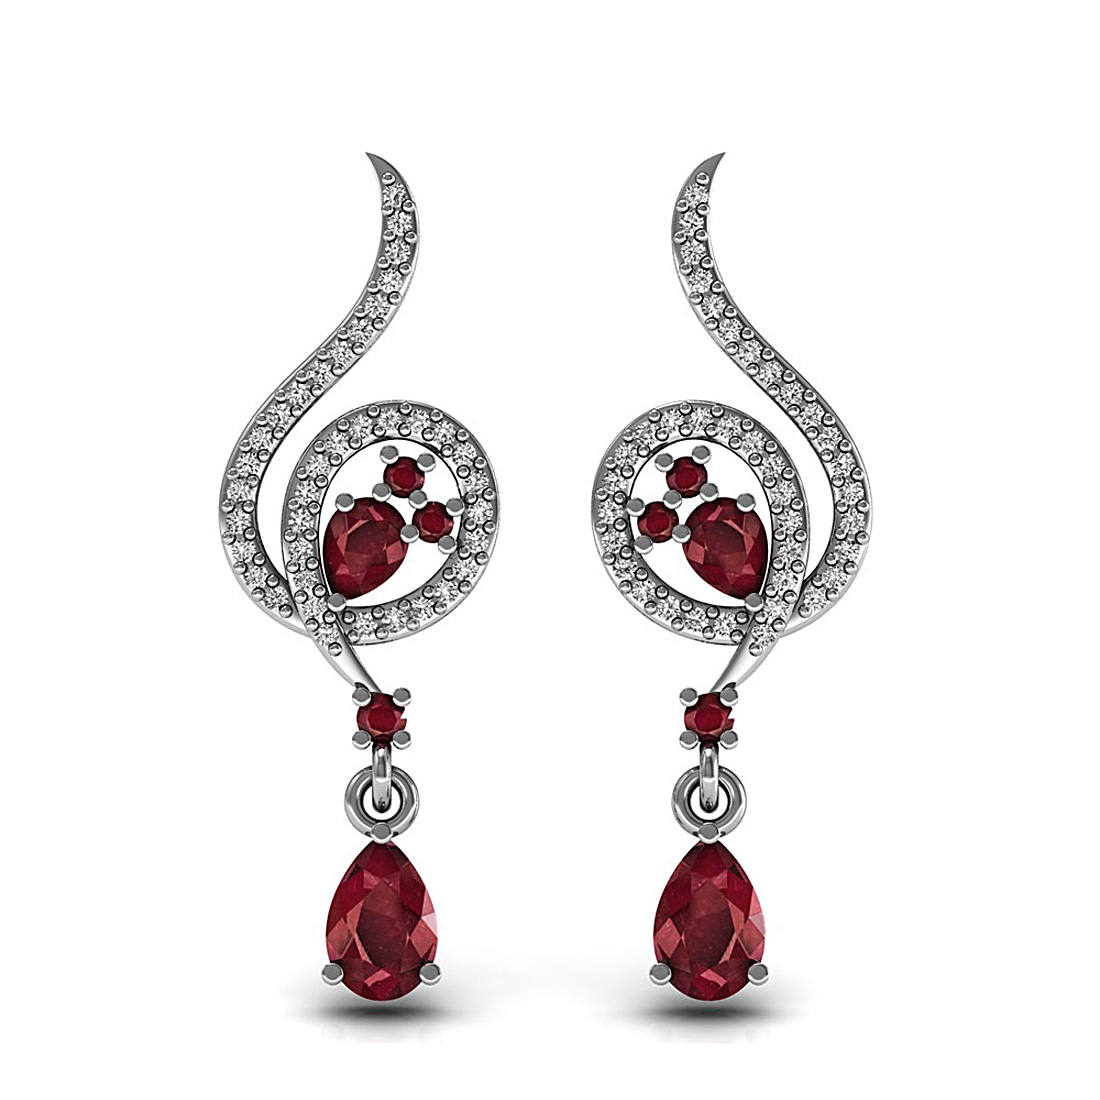 This beautiful pair of drop earrings made in 18k solid white gold and studded with natural ruby gemstone.